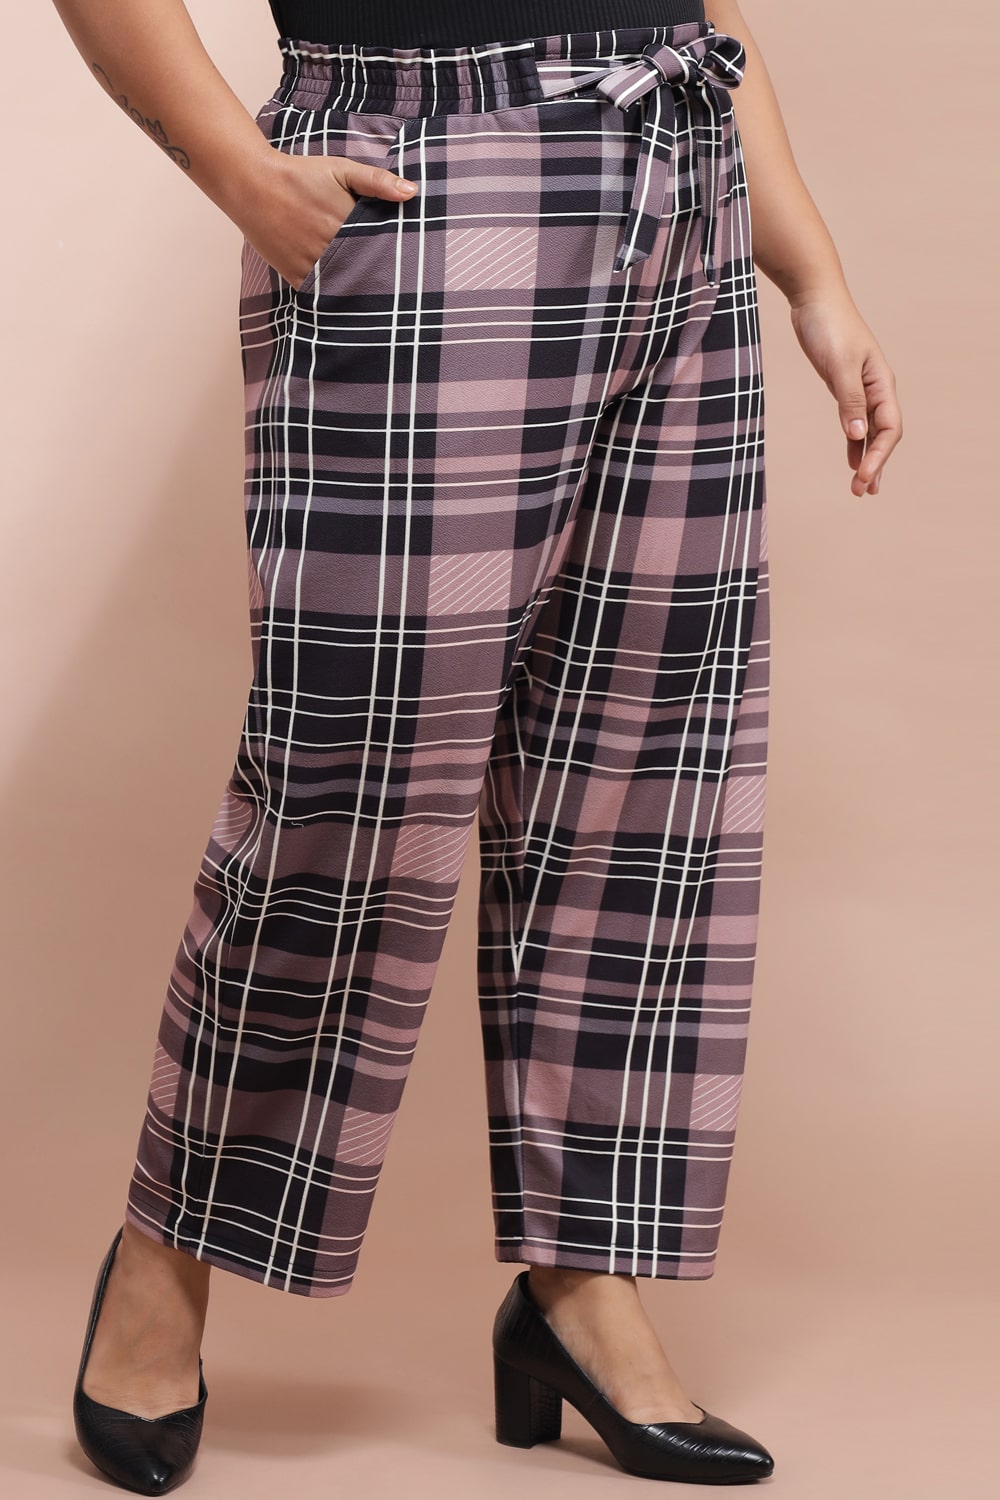 Buy Black Checkered Co-ord Set For Women | Indyverse